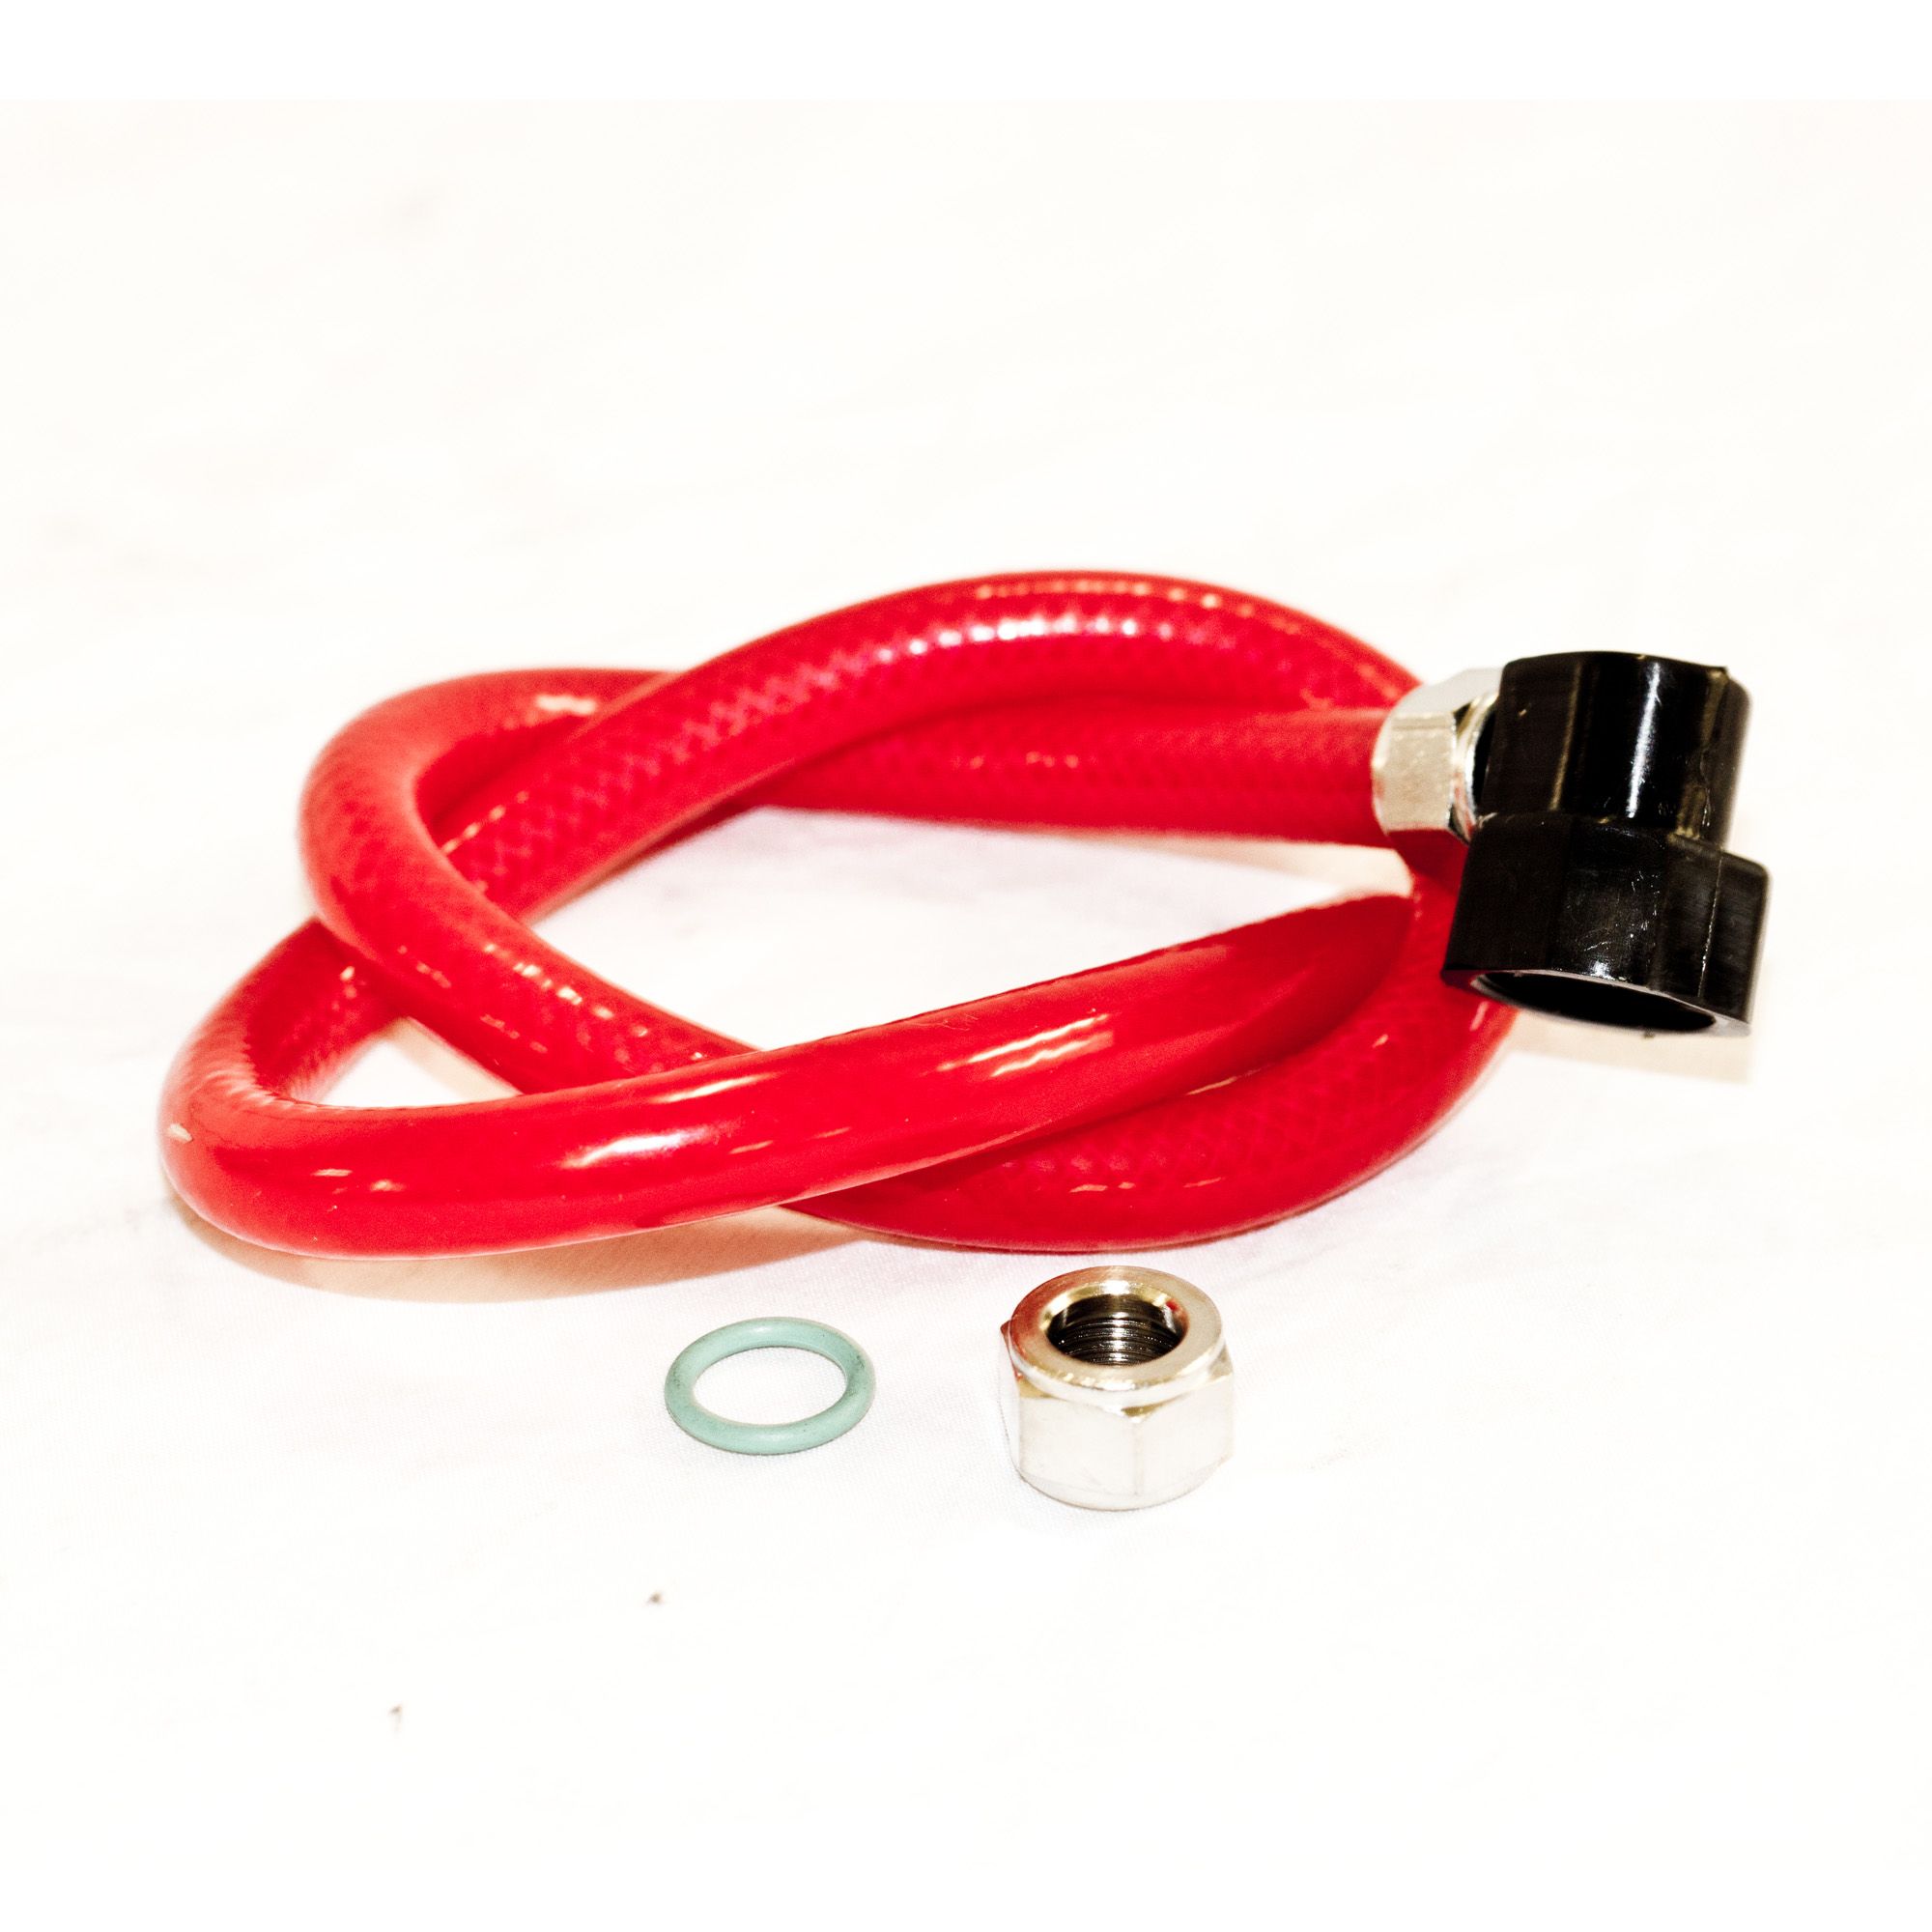 Replacement Water to Coupling Hose for Aqua Pro Vac